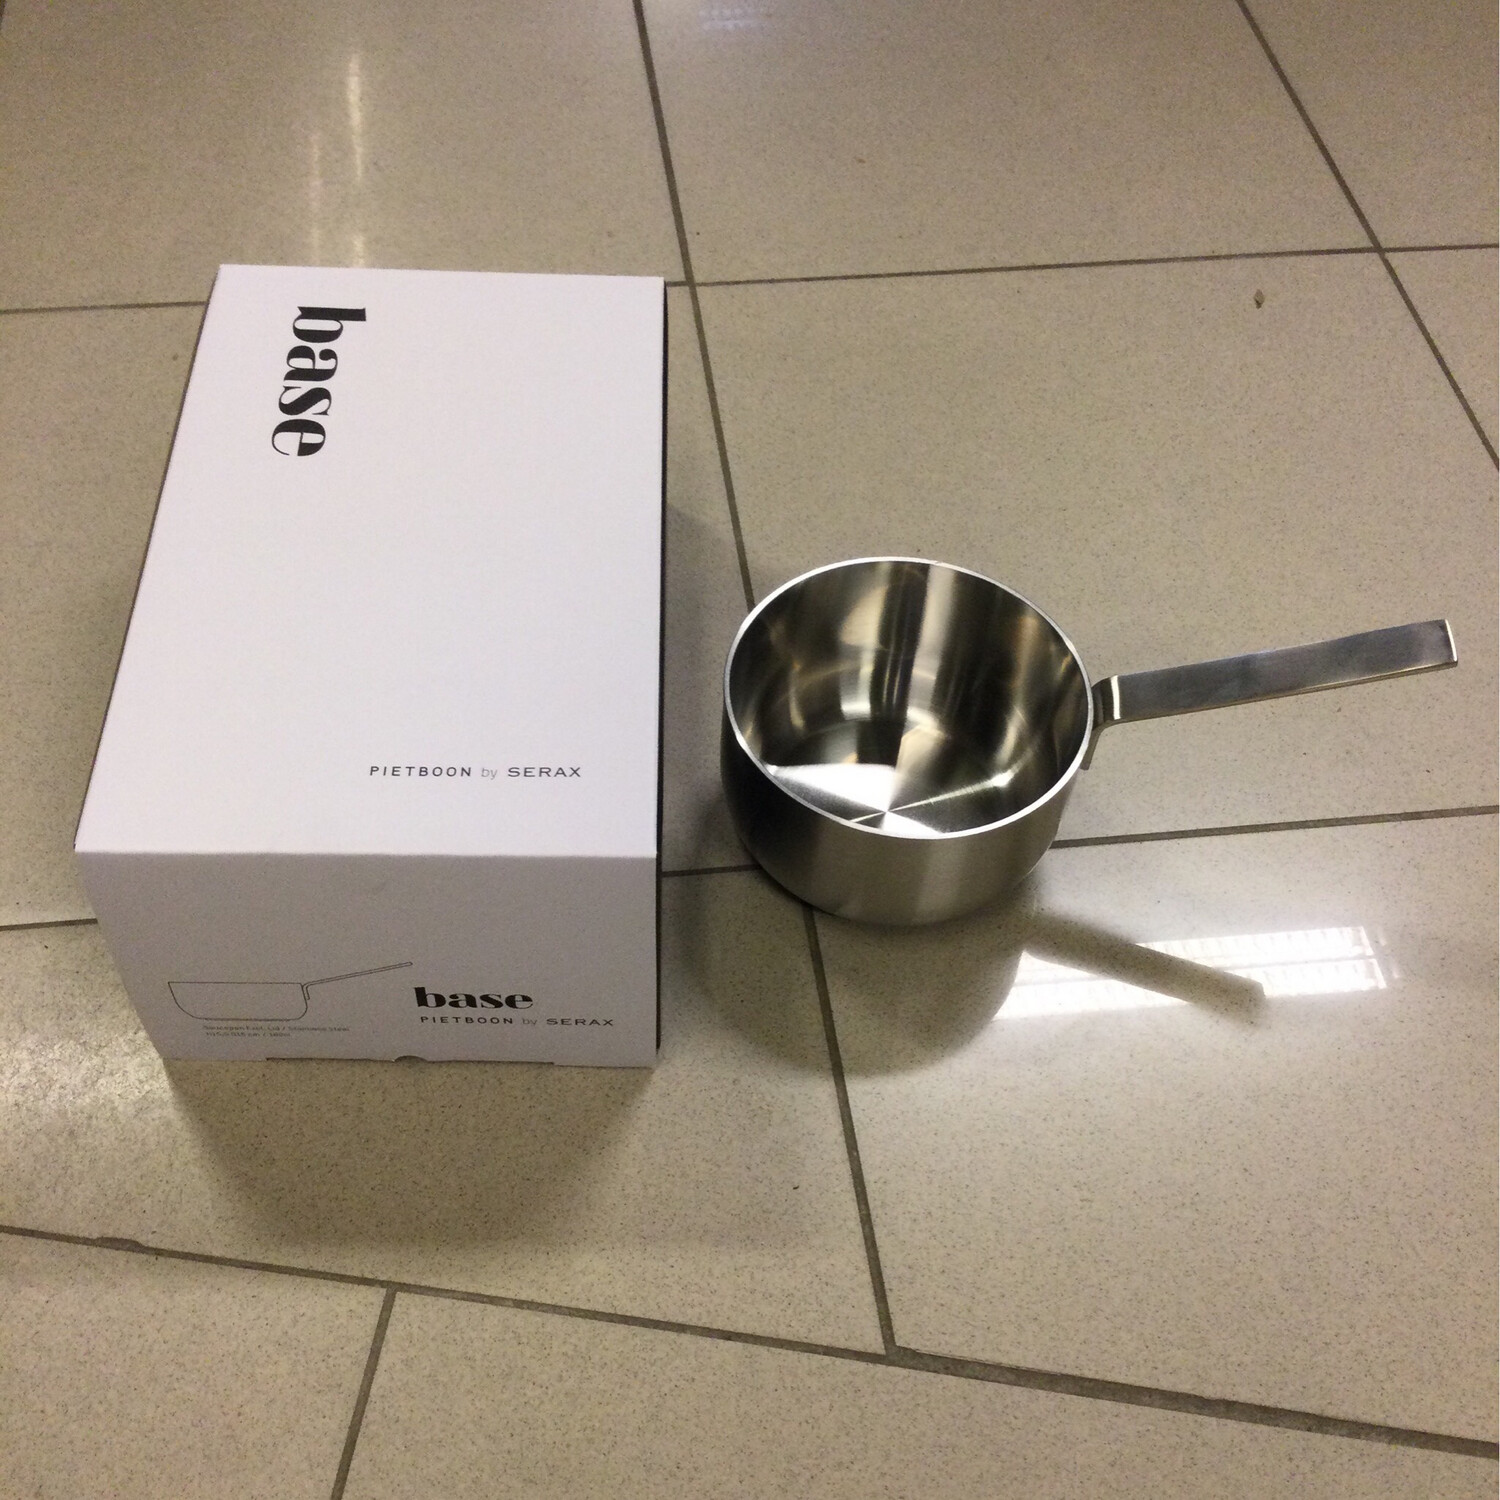 SERAX Saucepan Excl. Lid Stainless Steel 16cm 1,8L Pietboon